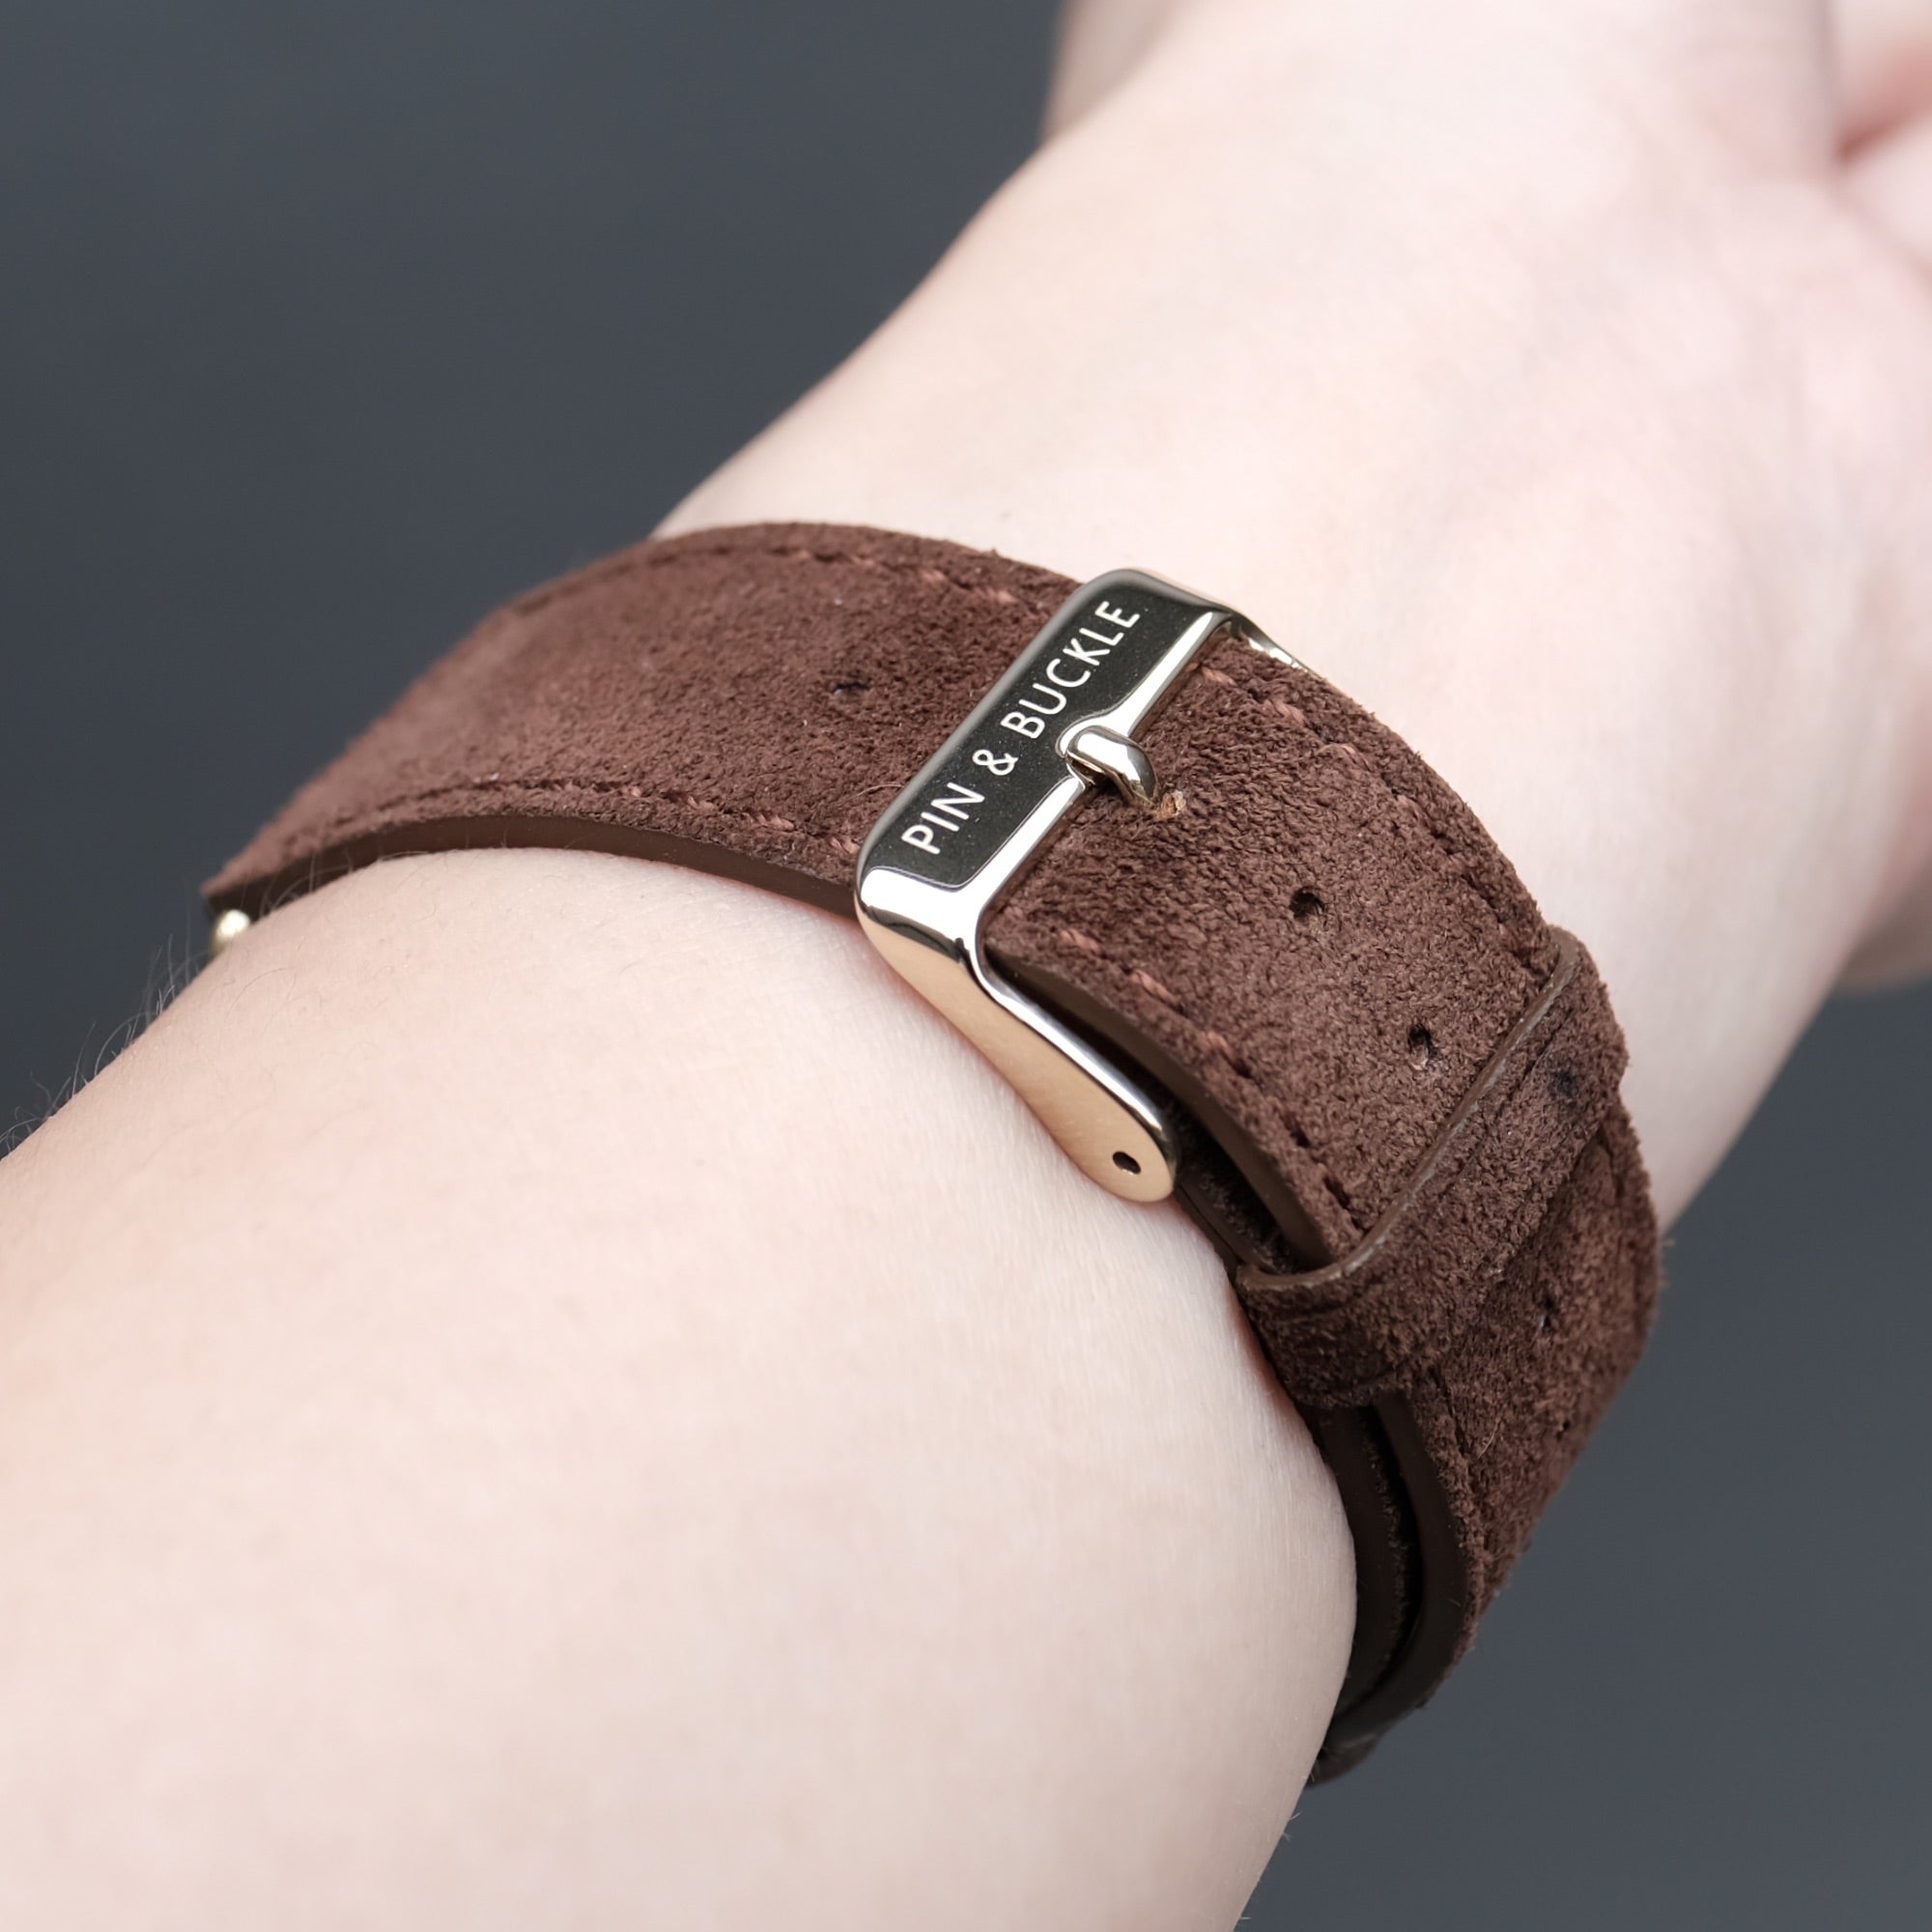 Pin and Buckle Apple Watch Bands - Velour - Suede Leather Apple Watch Band - Chocolate - Gold Series 6 7 8 - Buckle